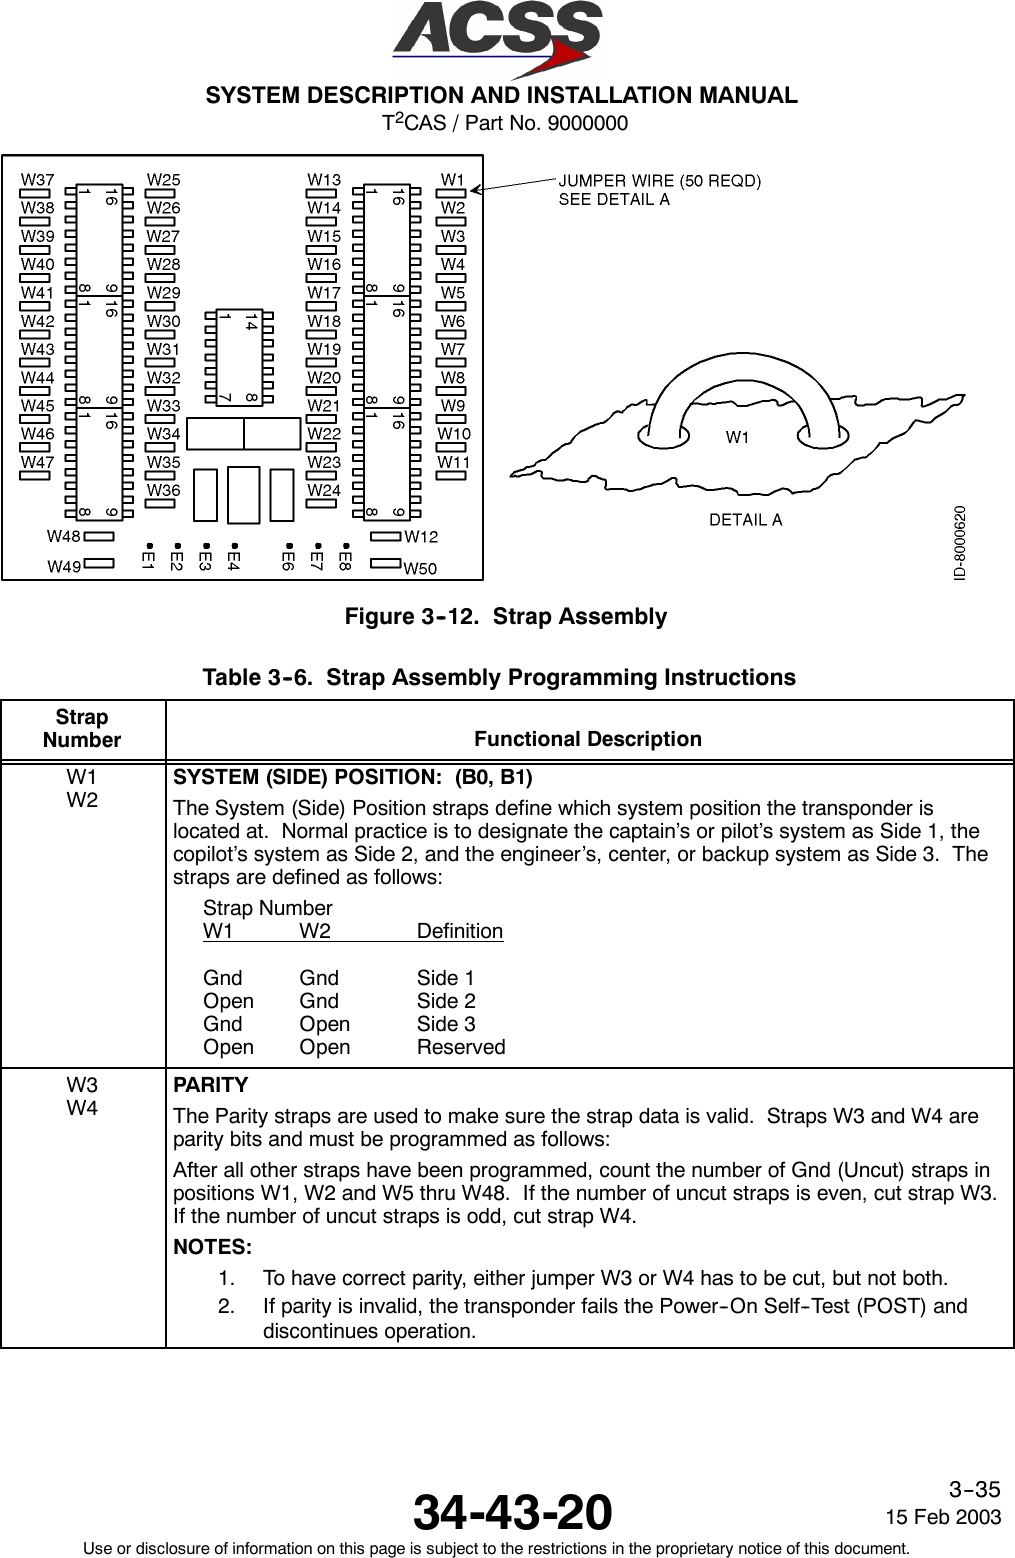 T2CAS / Part No. 9000000SYSTEM DESCRIPTION AND INSTALLATION MANUAL34-43-20 15 Feb 2003Use or disclosure of information on this page is subject to the restrictions in the proprietary notice of this document.3--35Figure 3--12. Strap AssemblyTable 3--6. Strap Assembly Programming InstructionsStrapNumber Functional DescriptionW1W2SYSTEM (SIDE) POSITION: (B0, B1)The System (Side) Position straps define which system position the transponder islocated at. Normal practice is to designate the captain’s or pilot’s system as Side 1, thecopilot’s system as Side 2, and the engineer’s, center, or backup system as Side 3. Thestraps are defined as follows:Strap NumberW1 W2 DefinitionGnd Gnd Side 1Open Gnd Side 2Gnd Open Side 3Open Open ReservedW3W4PARITYThe Parity straps are used to make sure the strap data is valid. Straps W3 and W4 areparity bits and must be programmed as follows:After all other straps have been programmed, count the number of Gnd (Uncut) straps inpositions W1, W2 and W5 thru W48. If the number of uncut straps is even, cut strap W3.If the number of uncut straps is odd, cut strap W4.NOTES:1. To have correct parity, either jumper W3 or W4 has to be cut, but not both.2. If parity is invalid, the transponder fails the Power--On Self--Test (POST) anddiscontinues operation.